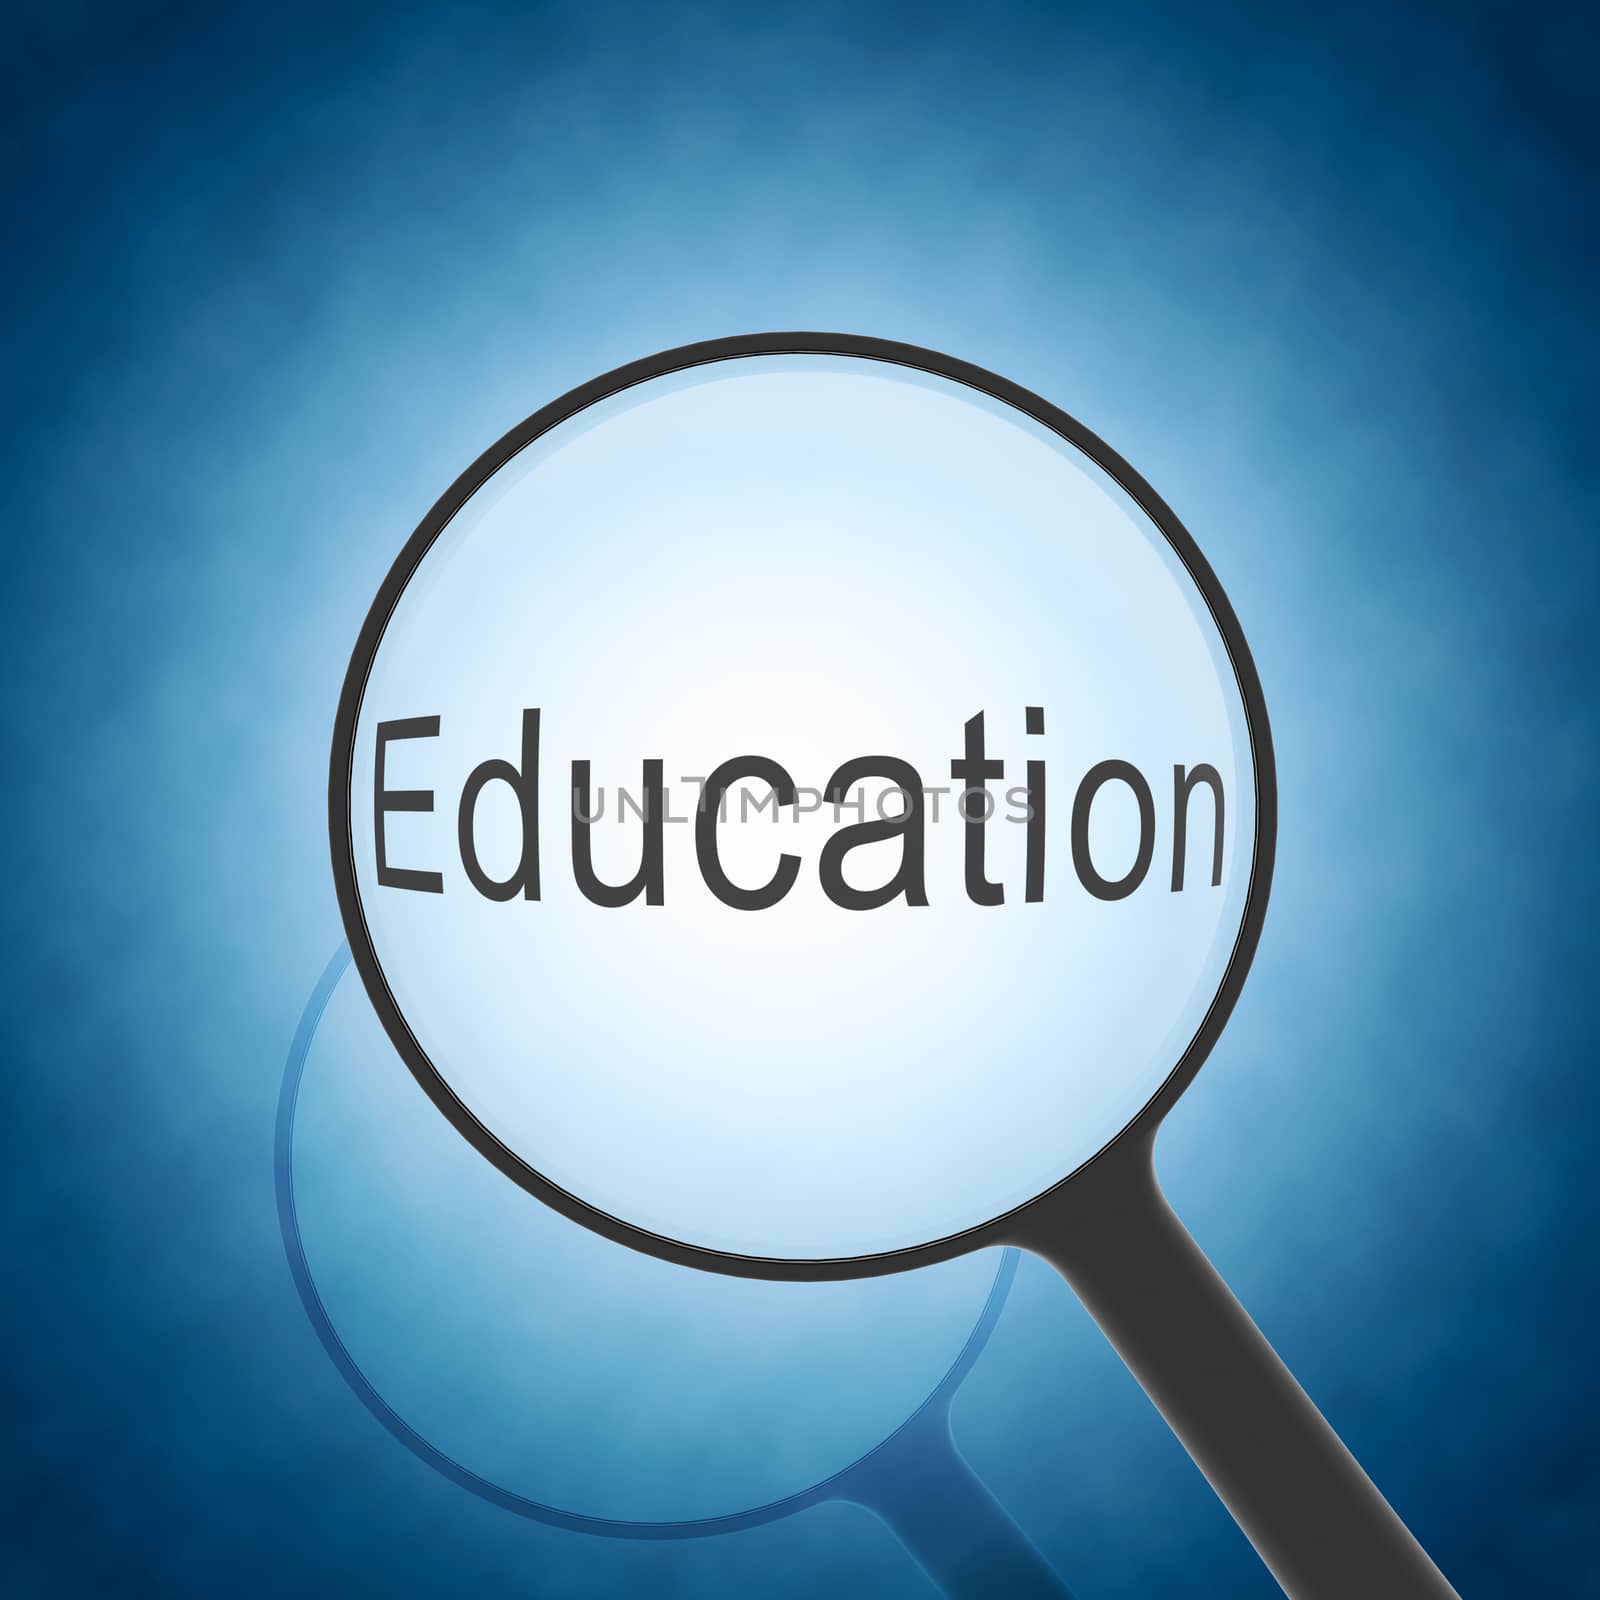 Magnifying glass looking word Education. Blue background. Business concept